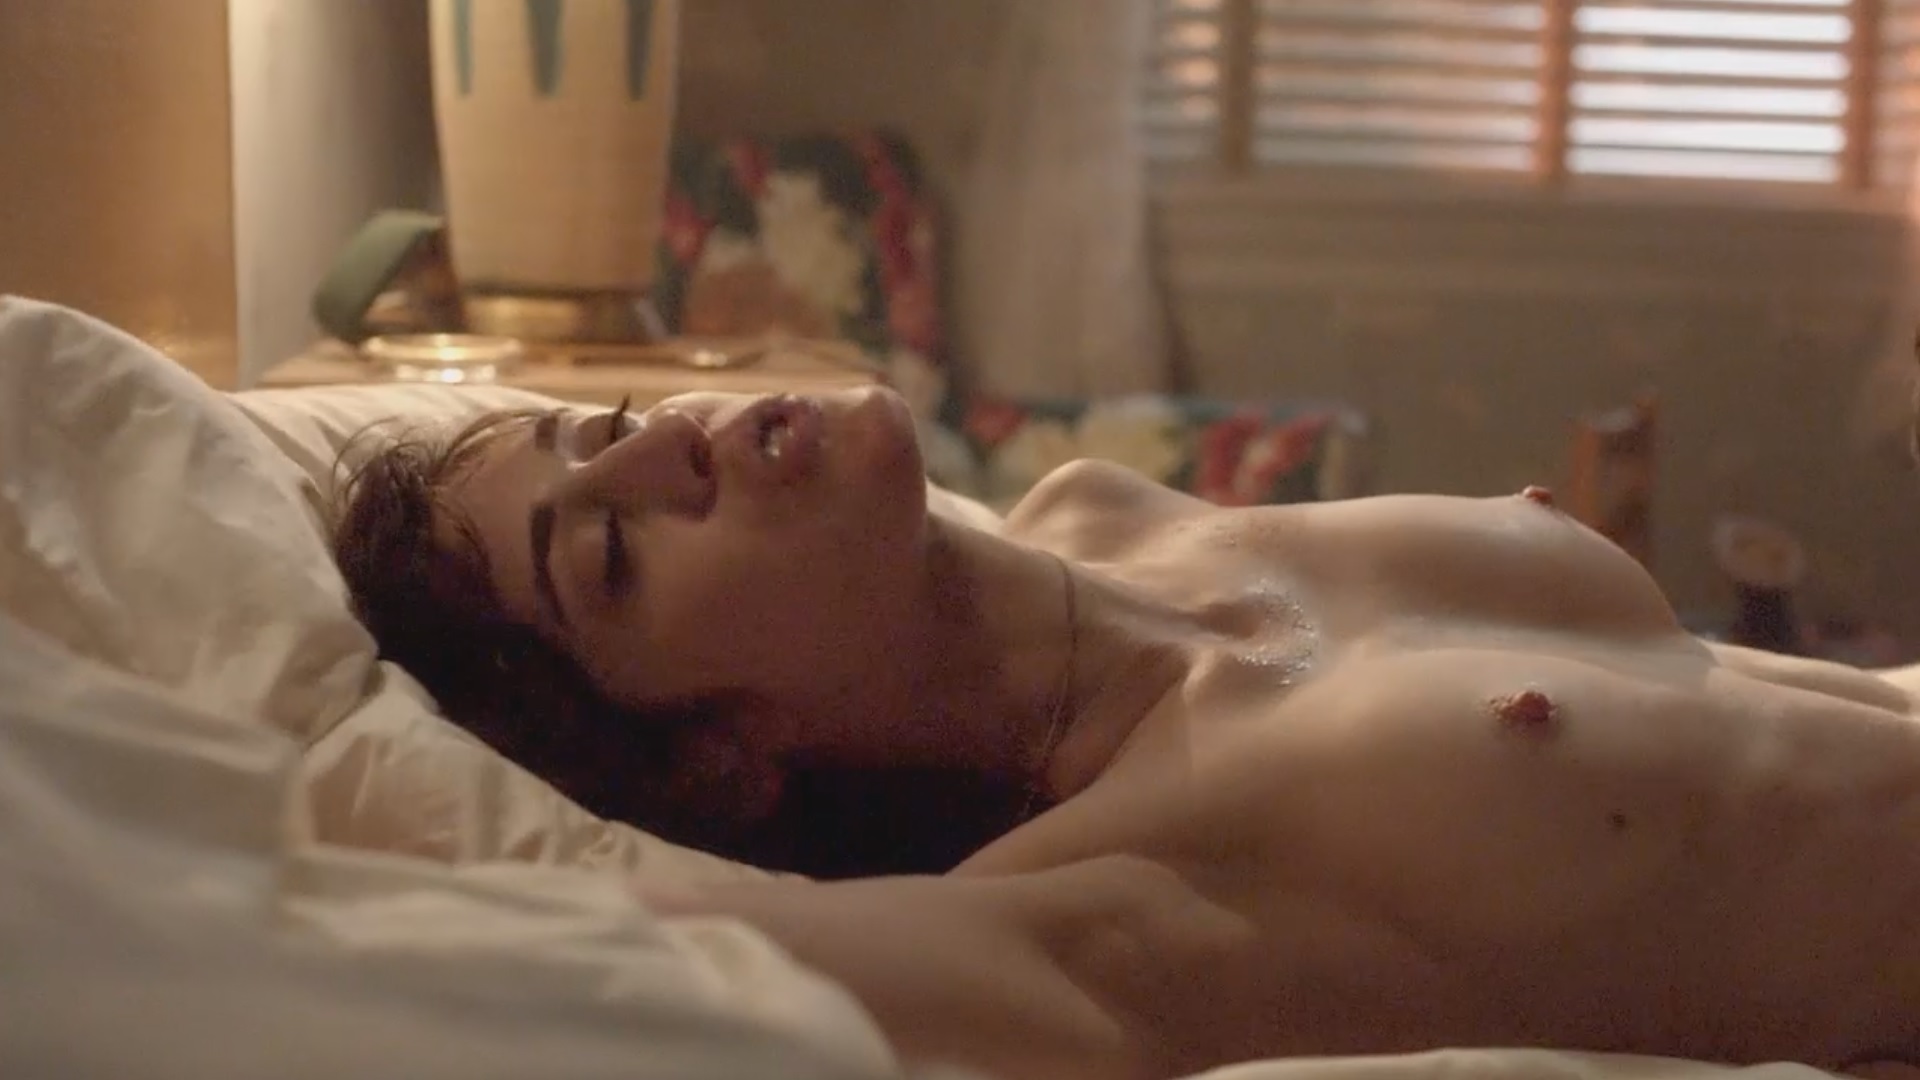 carol snell reccomend lizzy caplan nude pic pic